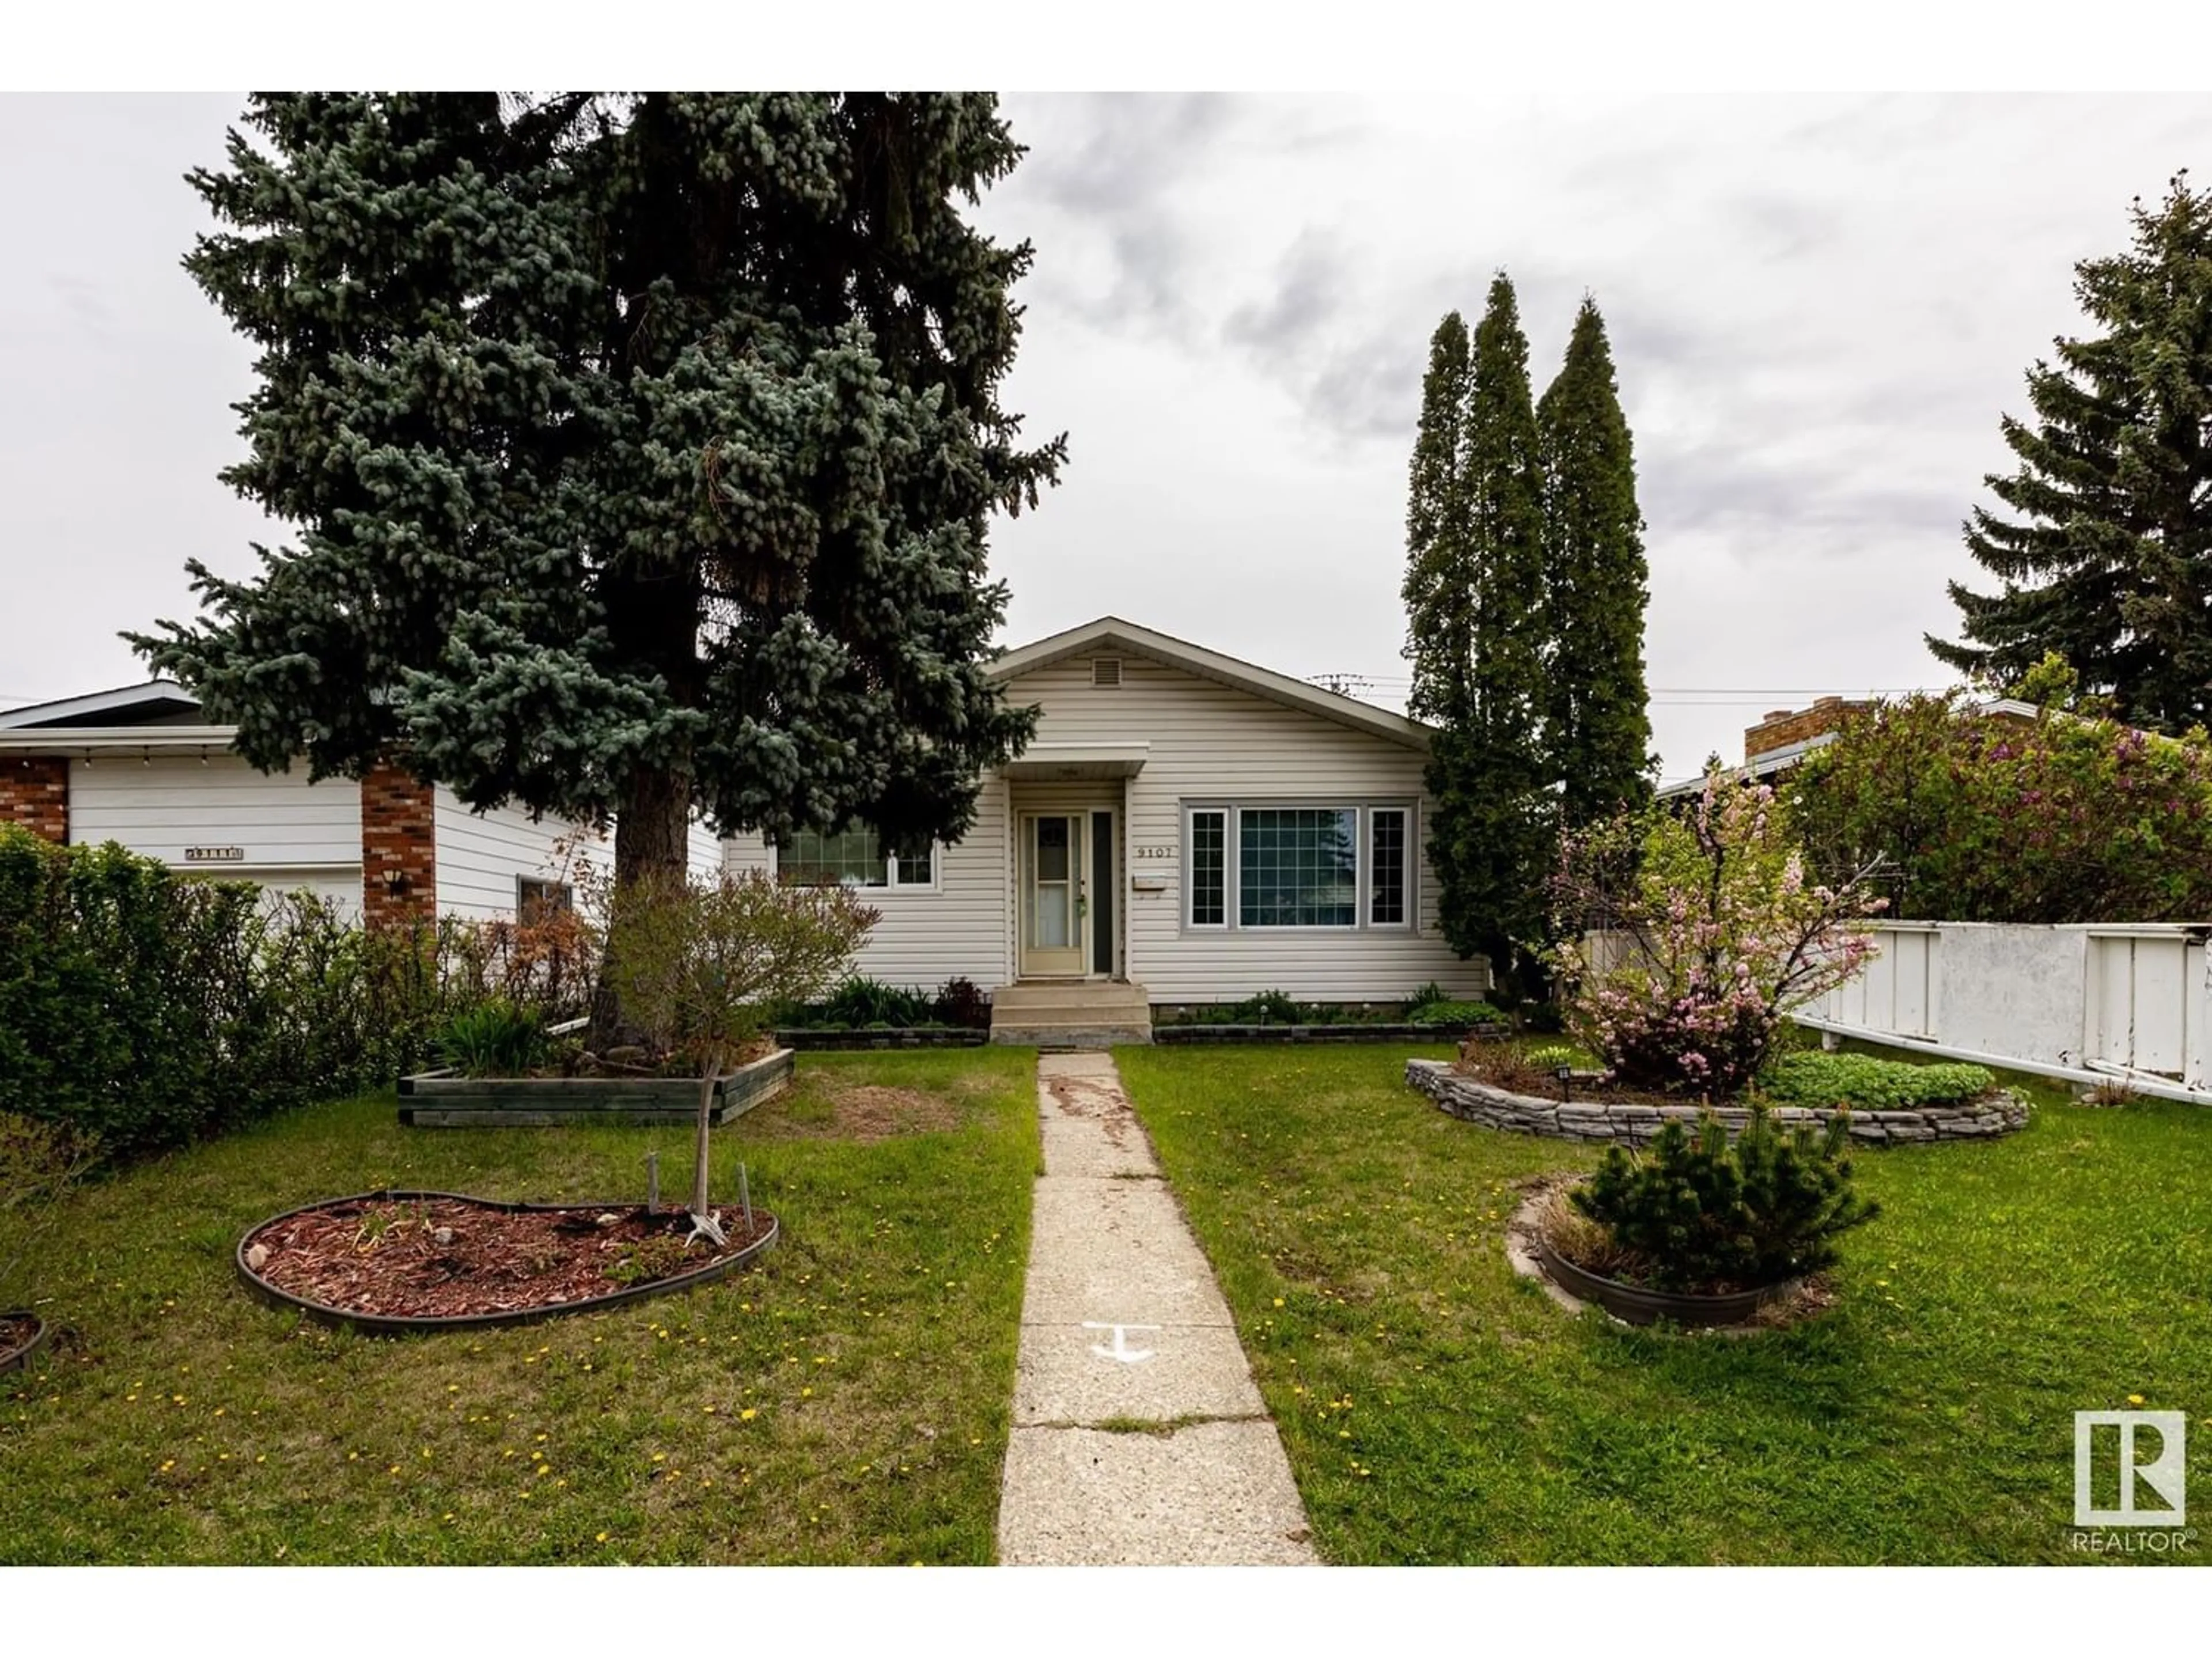 Frontside or backside of a home for 9107 74 ST NW, Edmonton Alberta T6B2B3